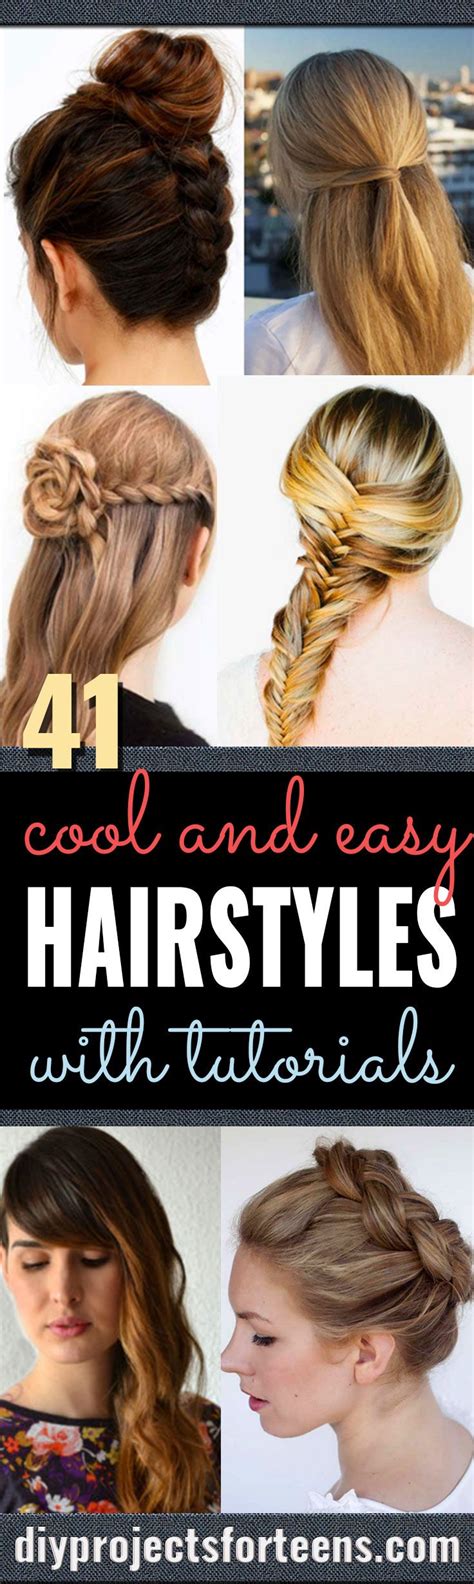 41 Diy Cool Easy Hairstyles That Real People Can Do At Home Hair Styles Cool Easy Hairstyles